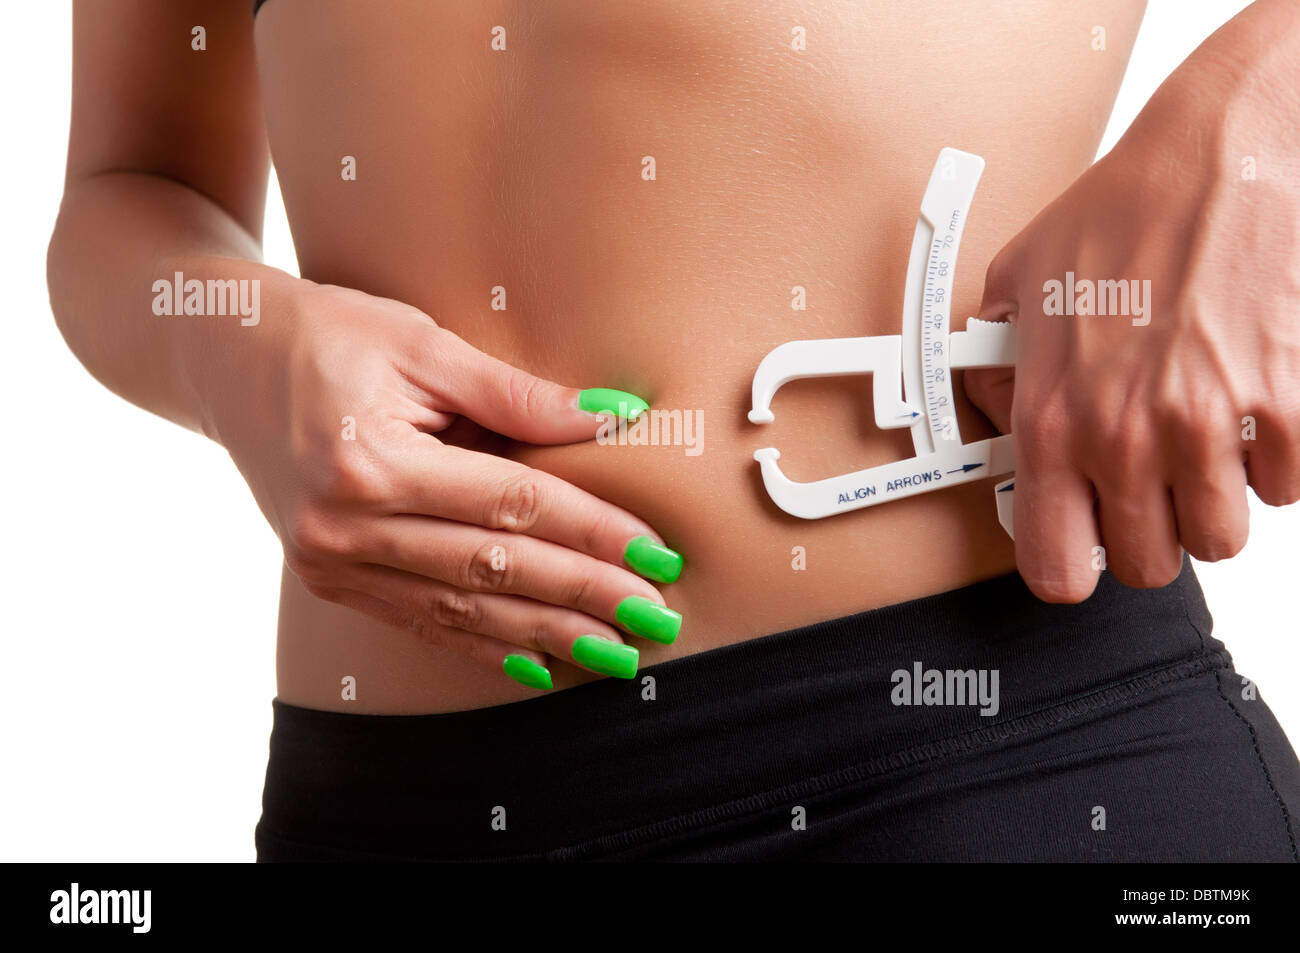 https://c8.alamy.com/comp/DBTM9K/woman-measuring-her-body-fat-with-a-body-fat-caliper-isolated-in-white-DBTM9K.jpg